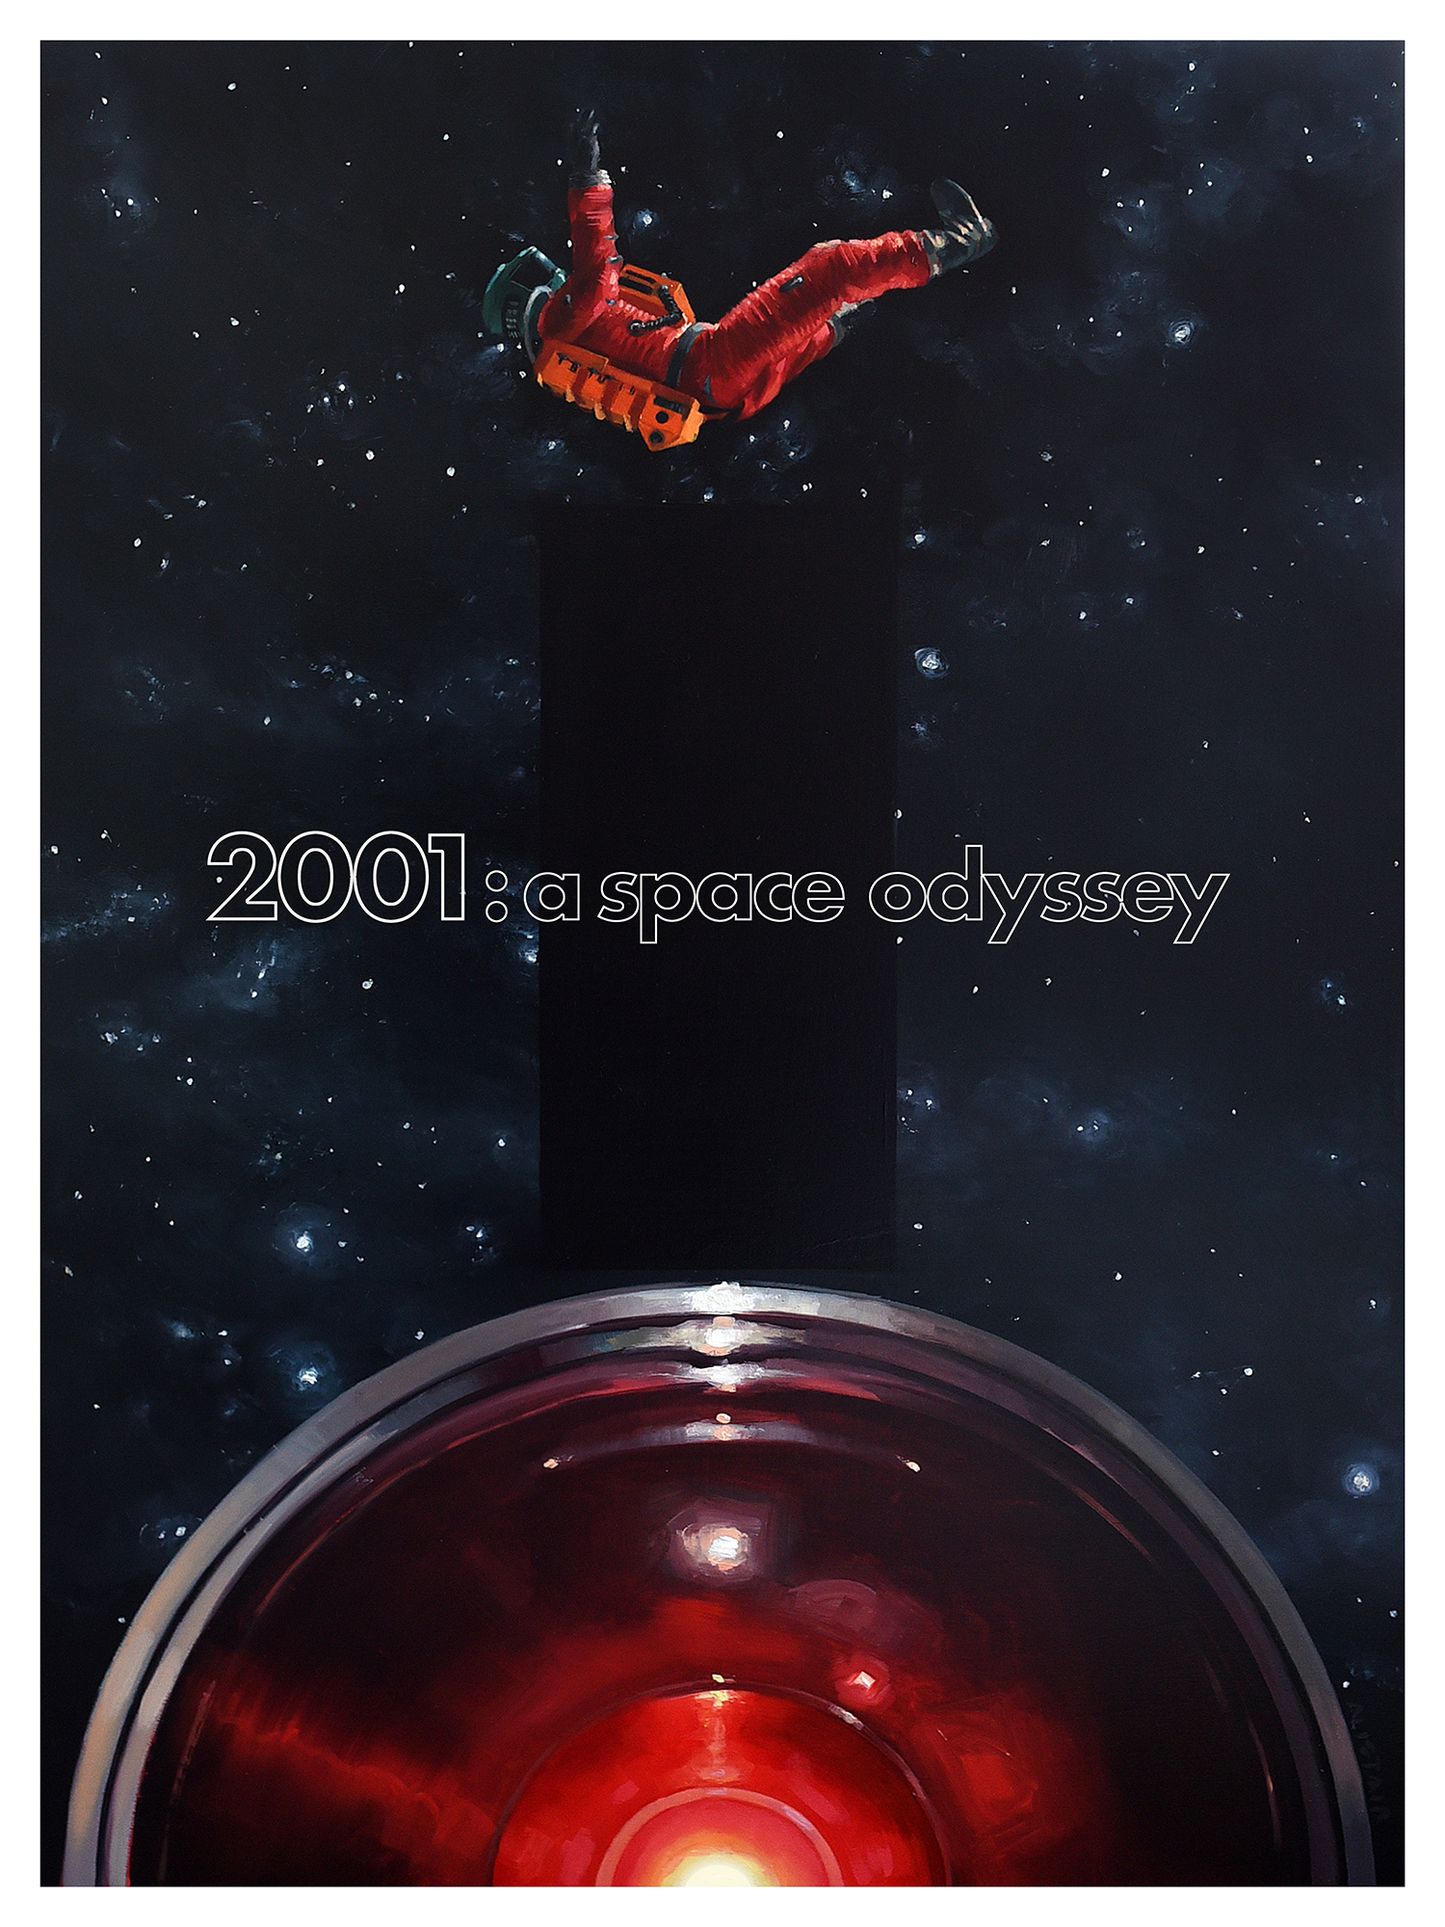 Alistair Little "2001: A Space Odyssey" Version B